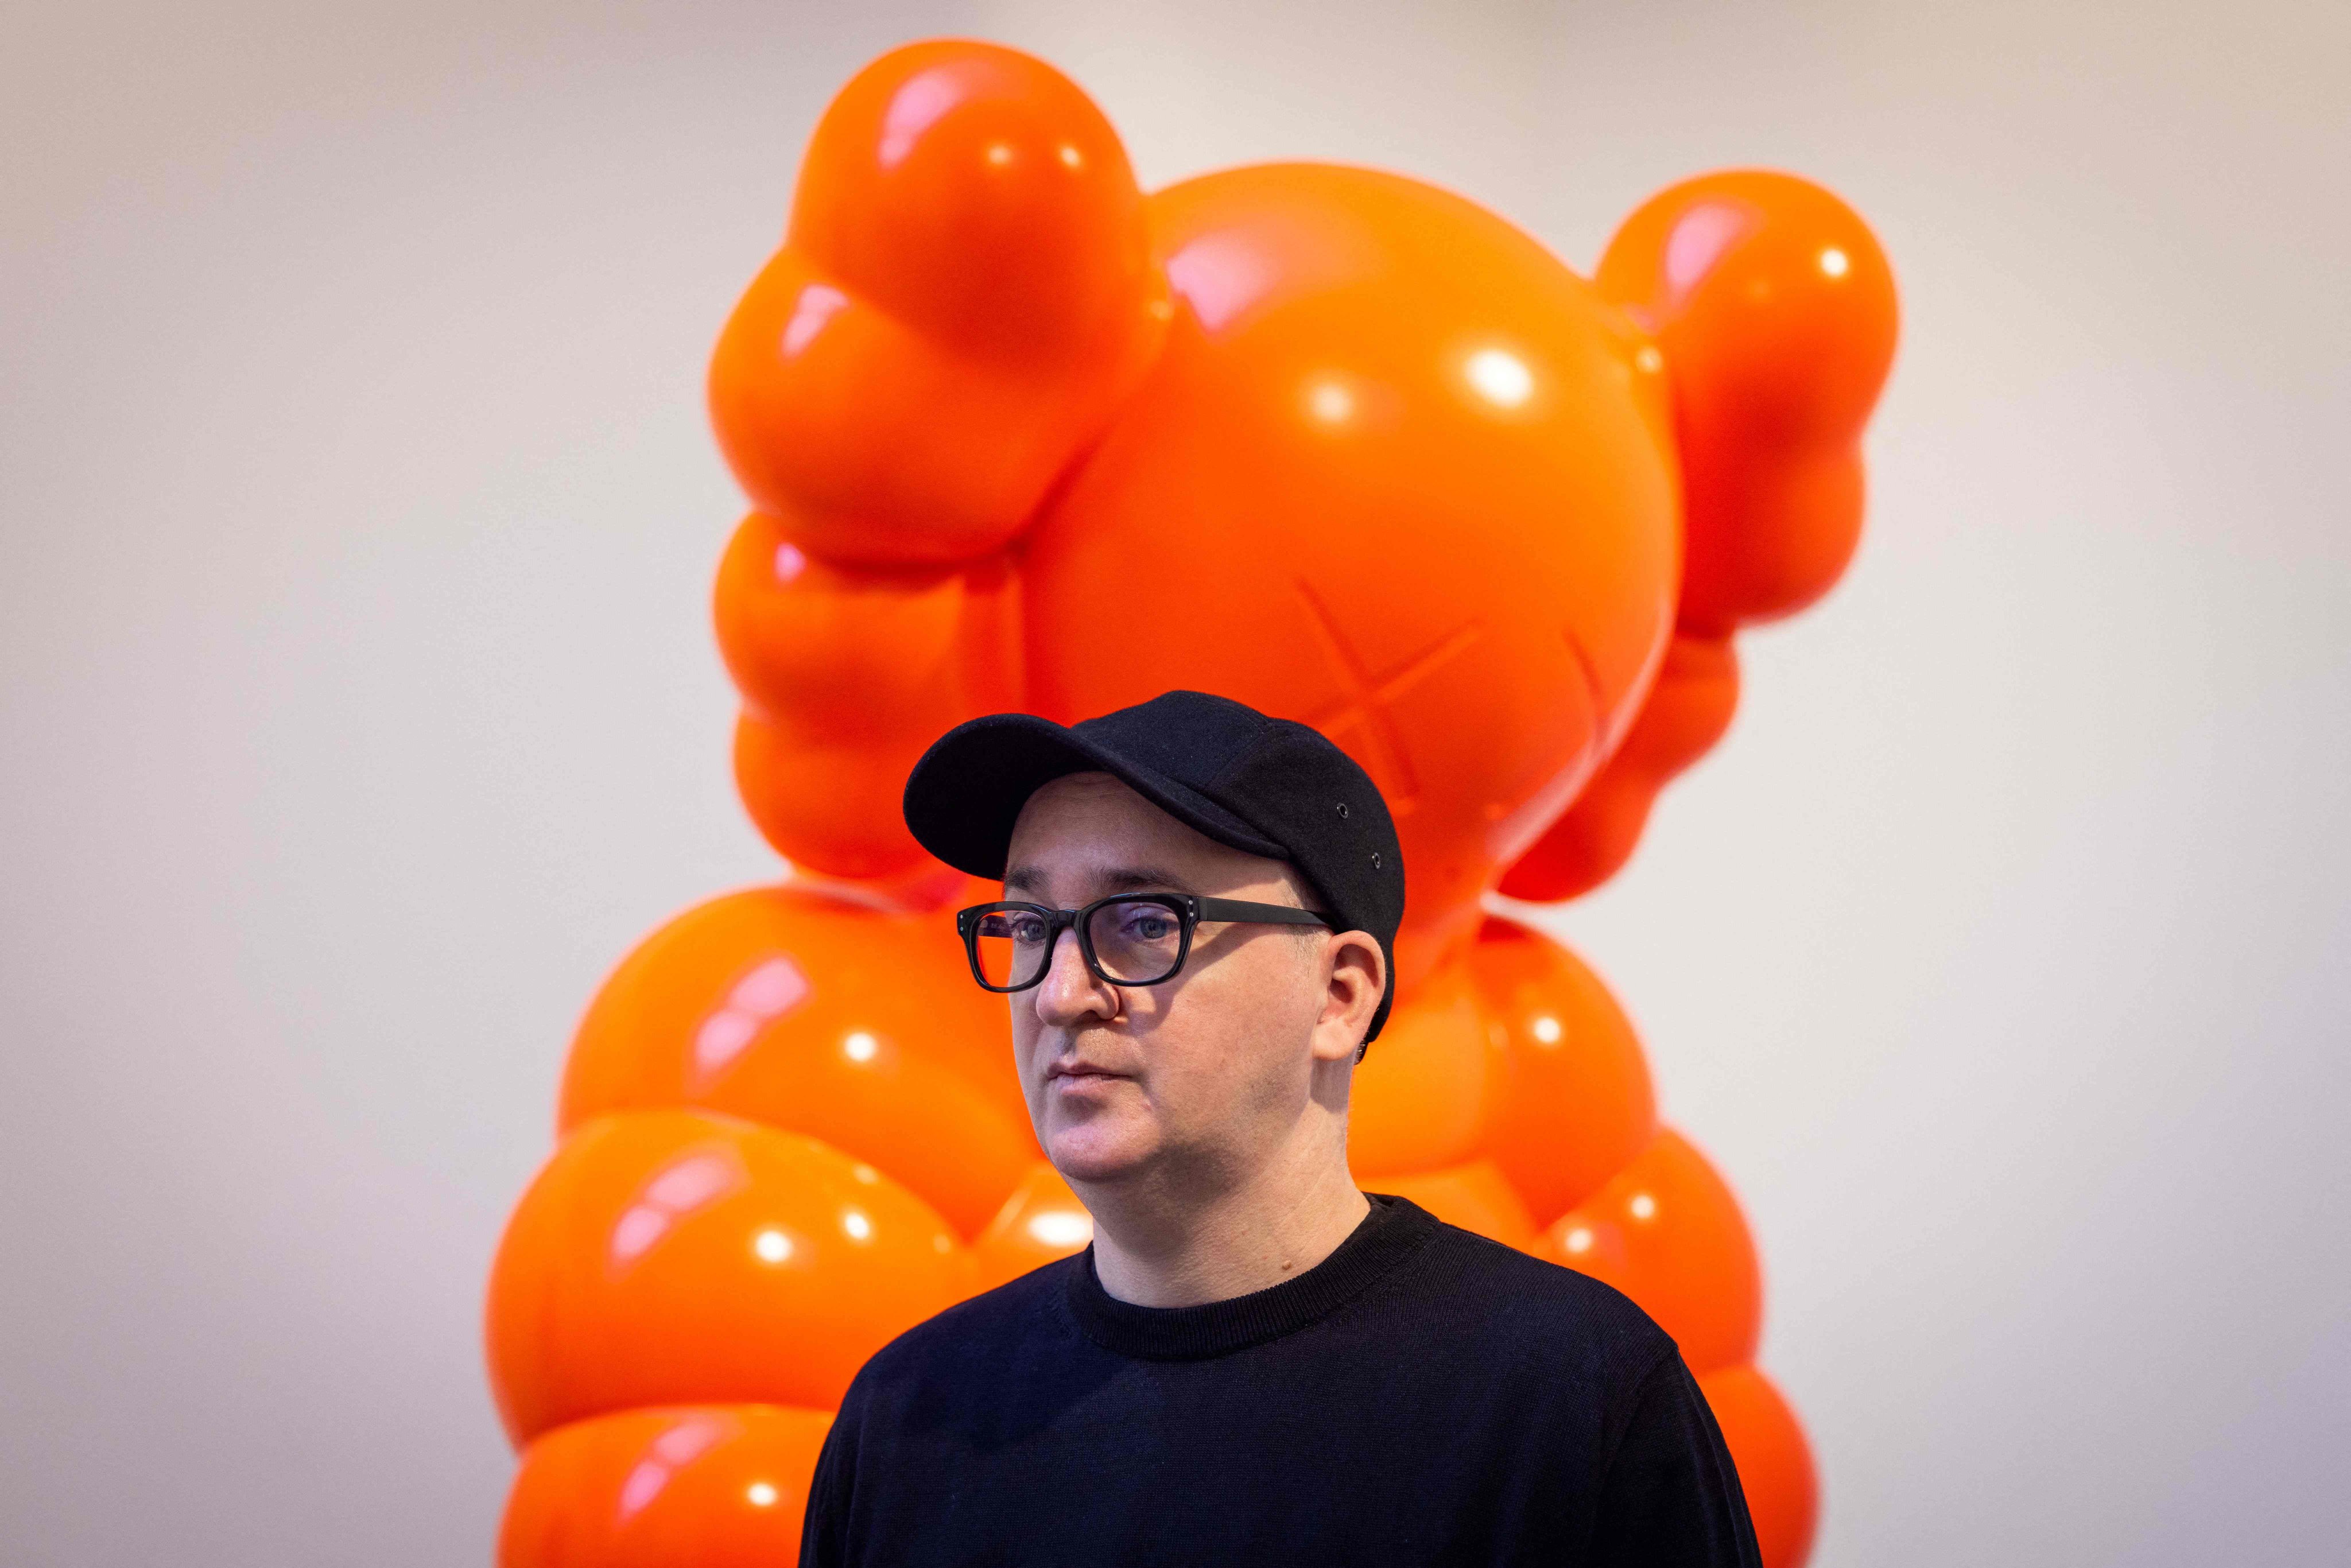 US artist Kaws with his artwork Kaws What Party at a preview of his exhibition at the Serpentine Gallery in London. Photo: Tolga Akmen/AFP